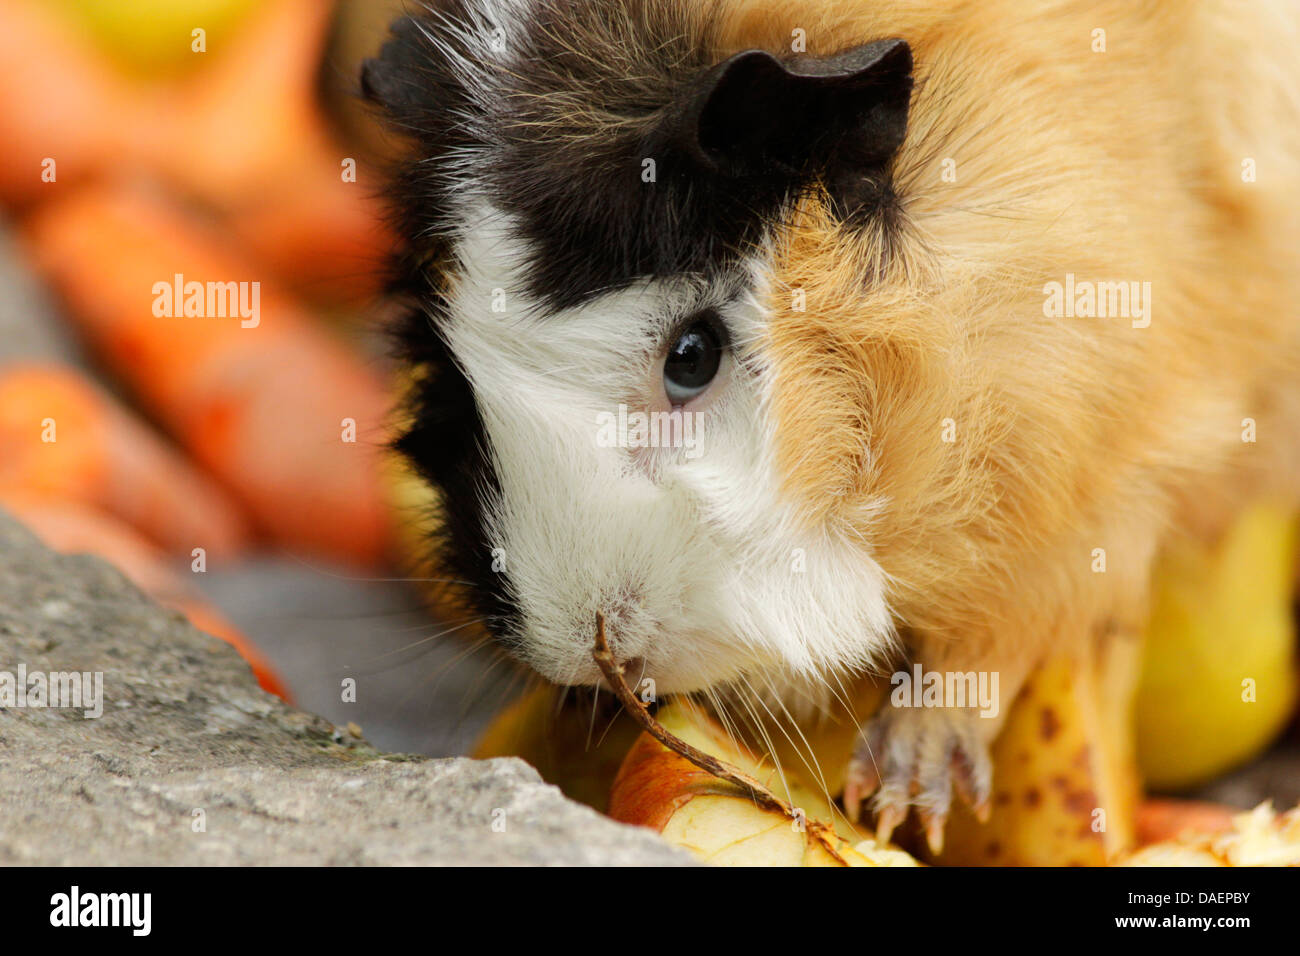 domestic Guinea pig (Cavia aperea f. porcellus), in an outdoor enclosure feeding on an apple Stock Photo